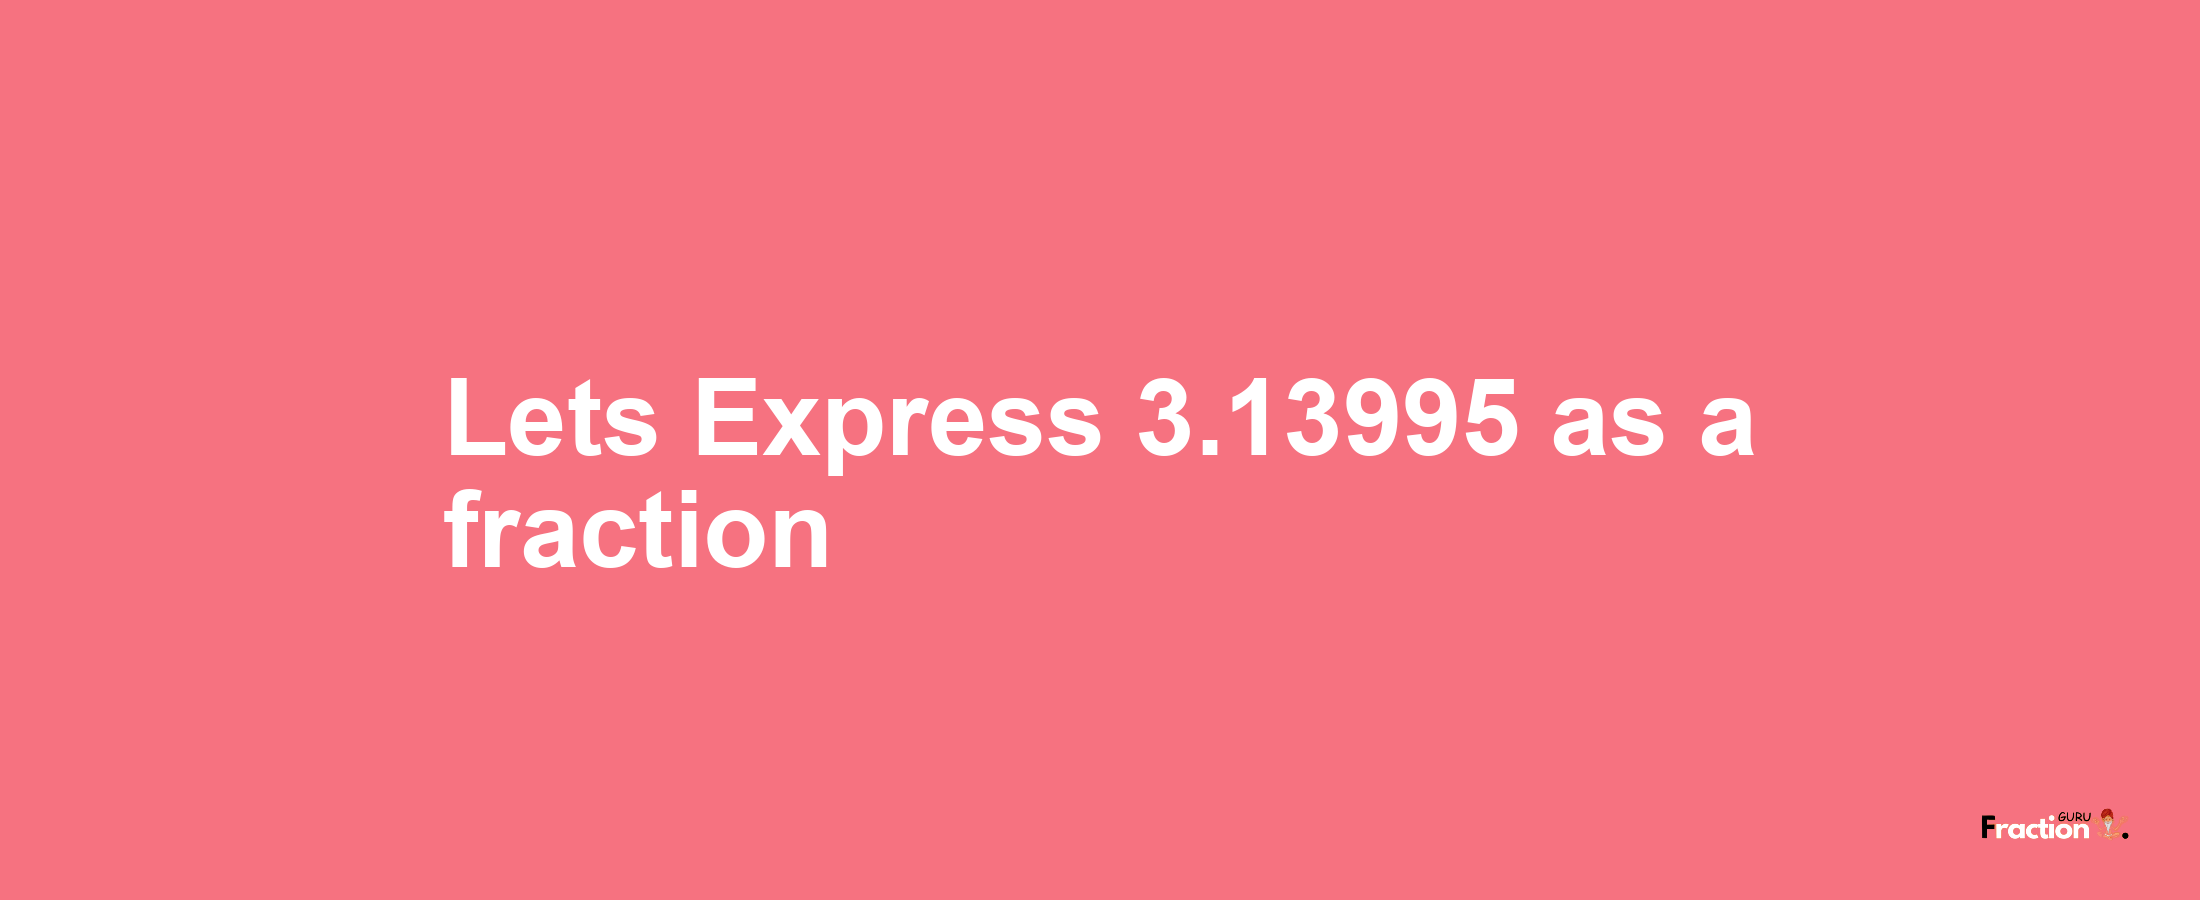 Lets Express 3.13995 as afraction